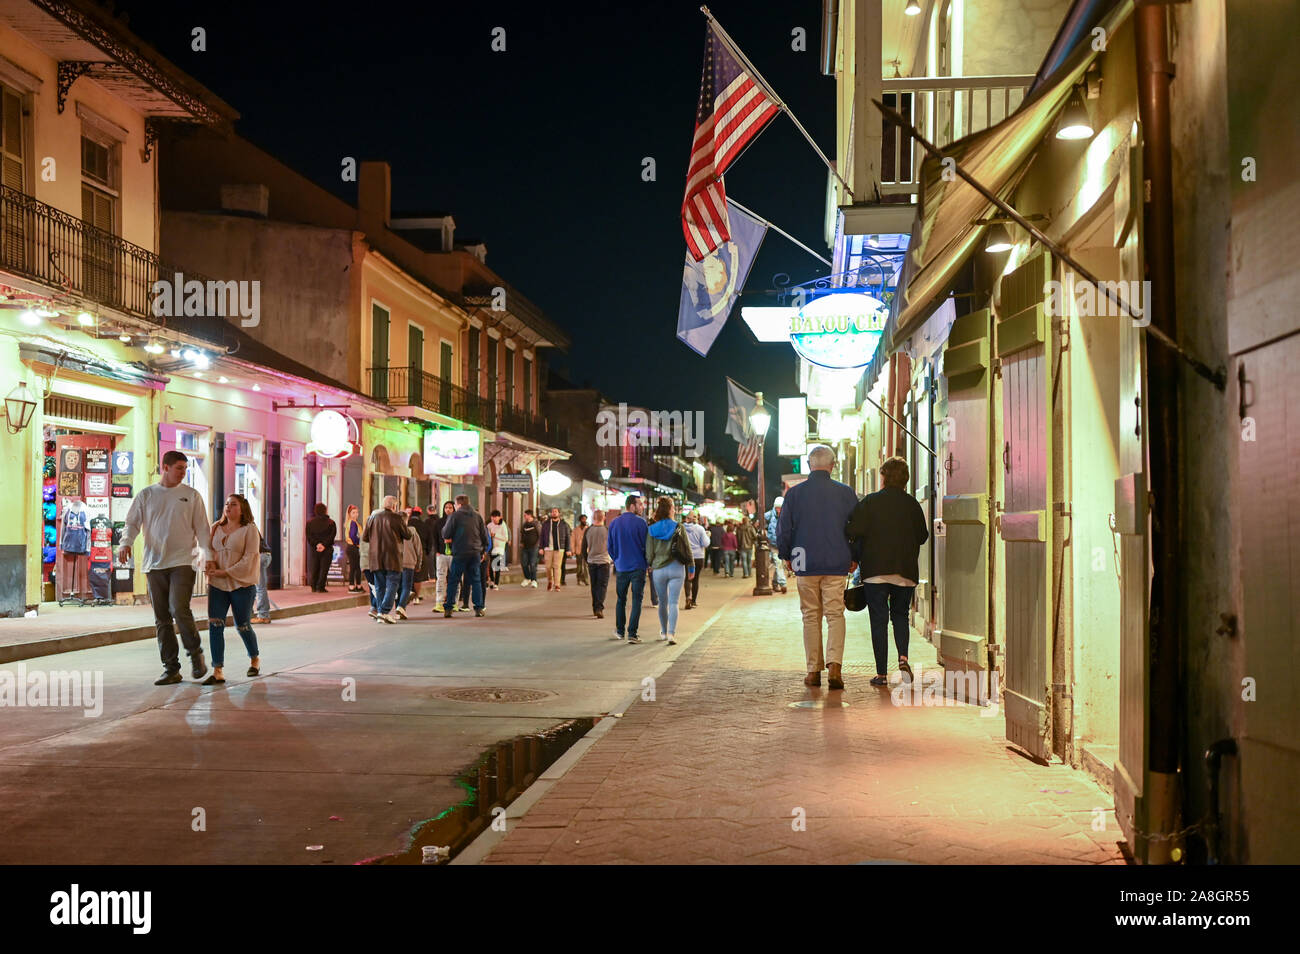 Bourbon Street by night in New Orleans. This historic street in the French Quarter is famous for its night life and live music bars. Stock Photo